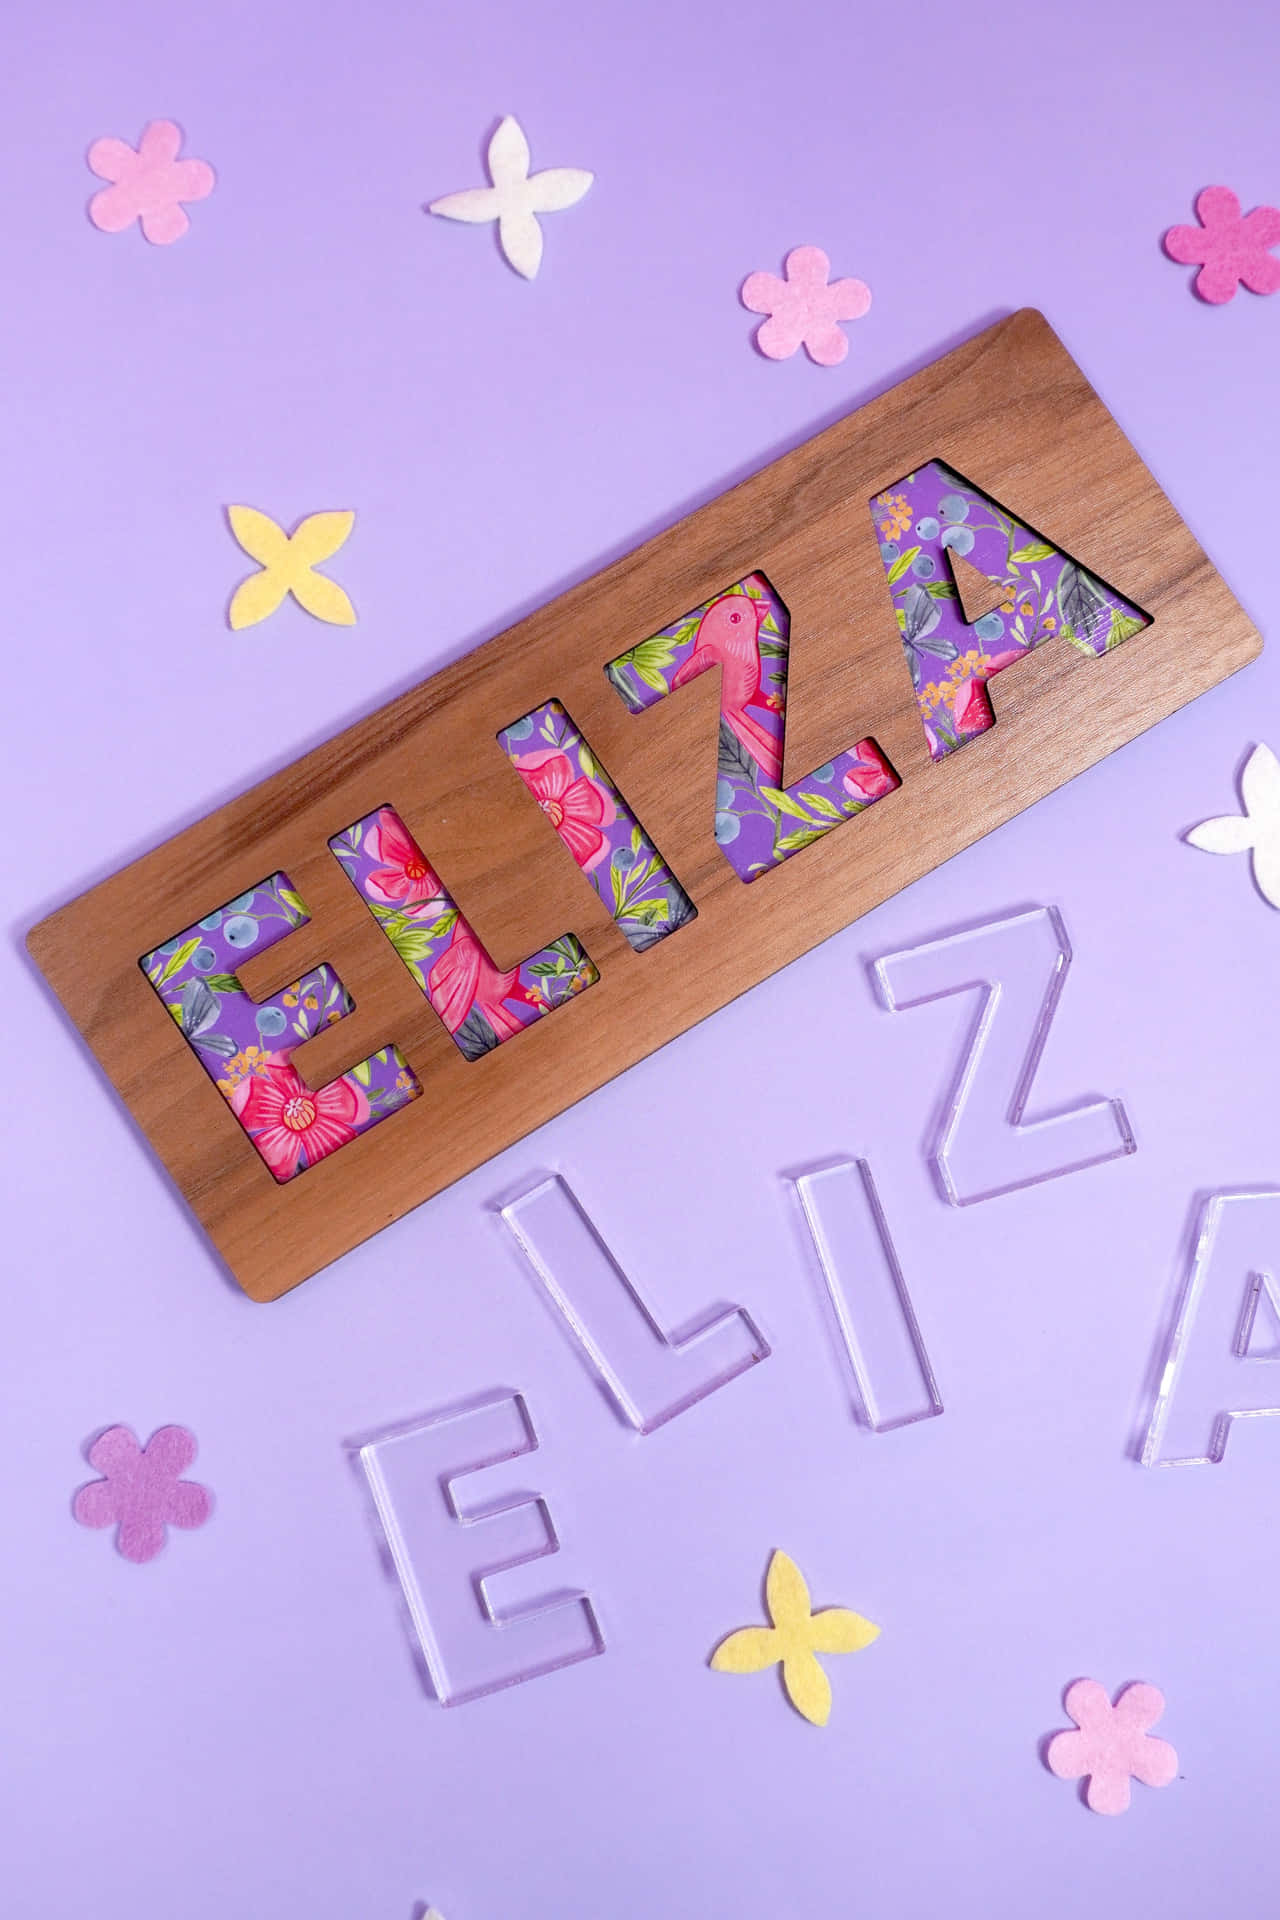 A Wooden Name Plaque With Flowers And Butterflies